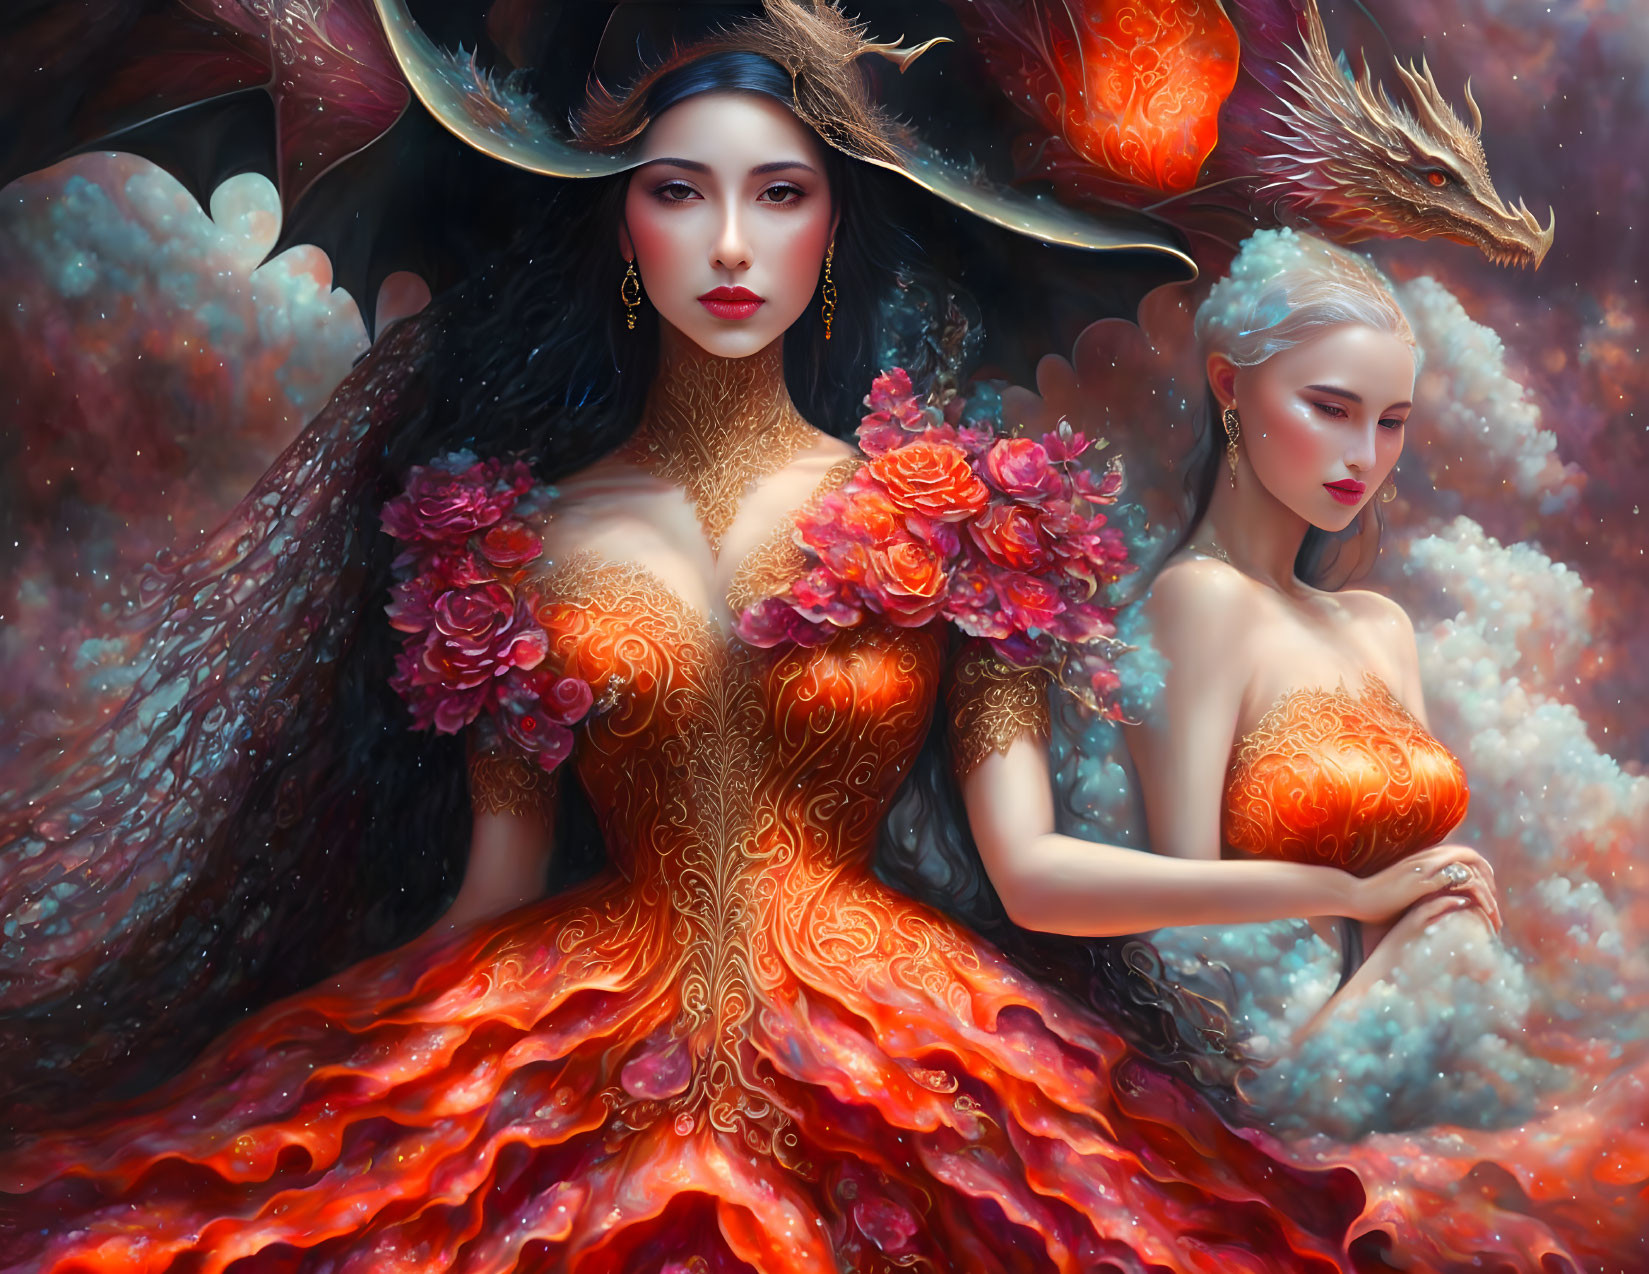 Ethereal women in ornate dresses with dragon in dreamlike setting